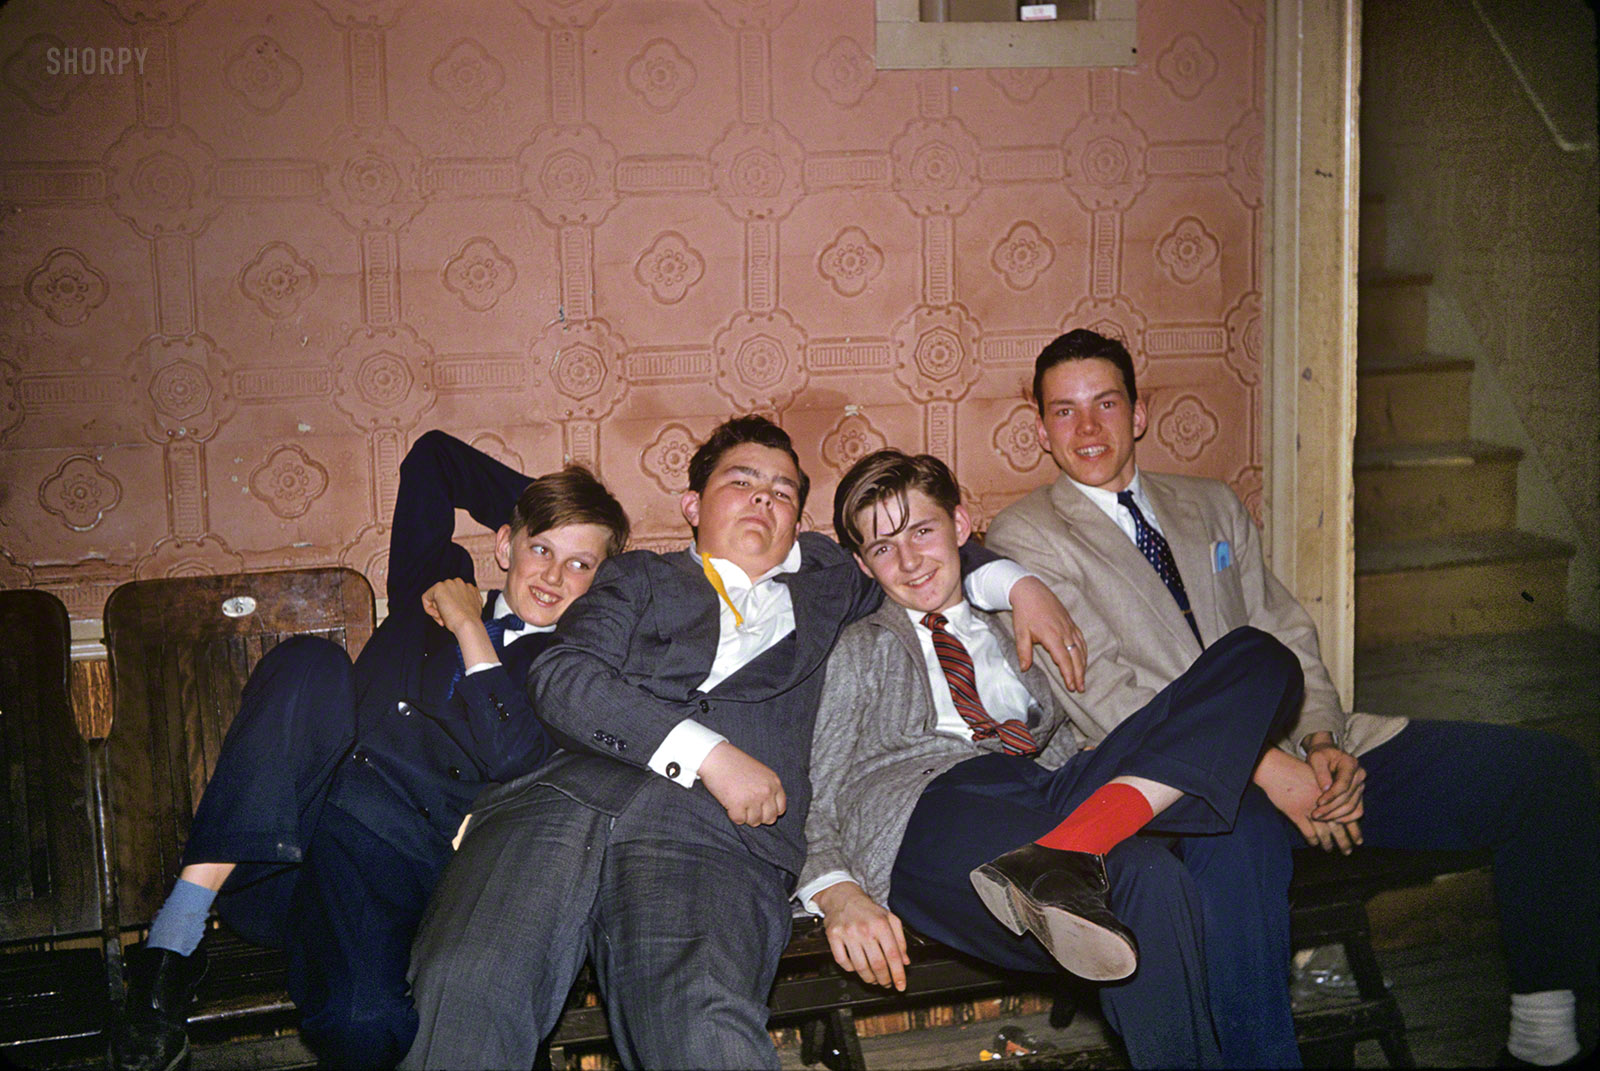 As a follow-up to yesterday's Pastel Princesses we present a retinue of possible Princes, or maybe court jesters, at what looks like the same event. Live it up while you can, boys. 35mm Kodachrome from the "Linda" slides. View full size.